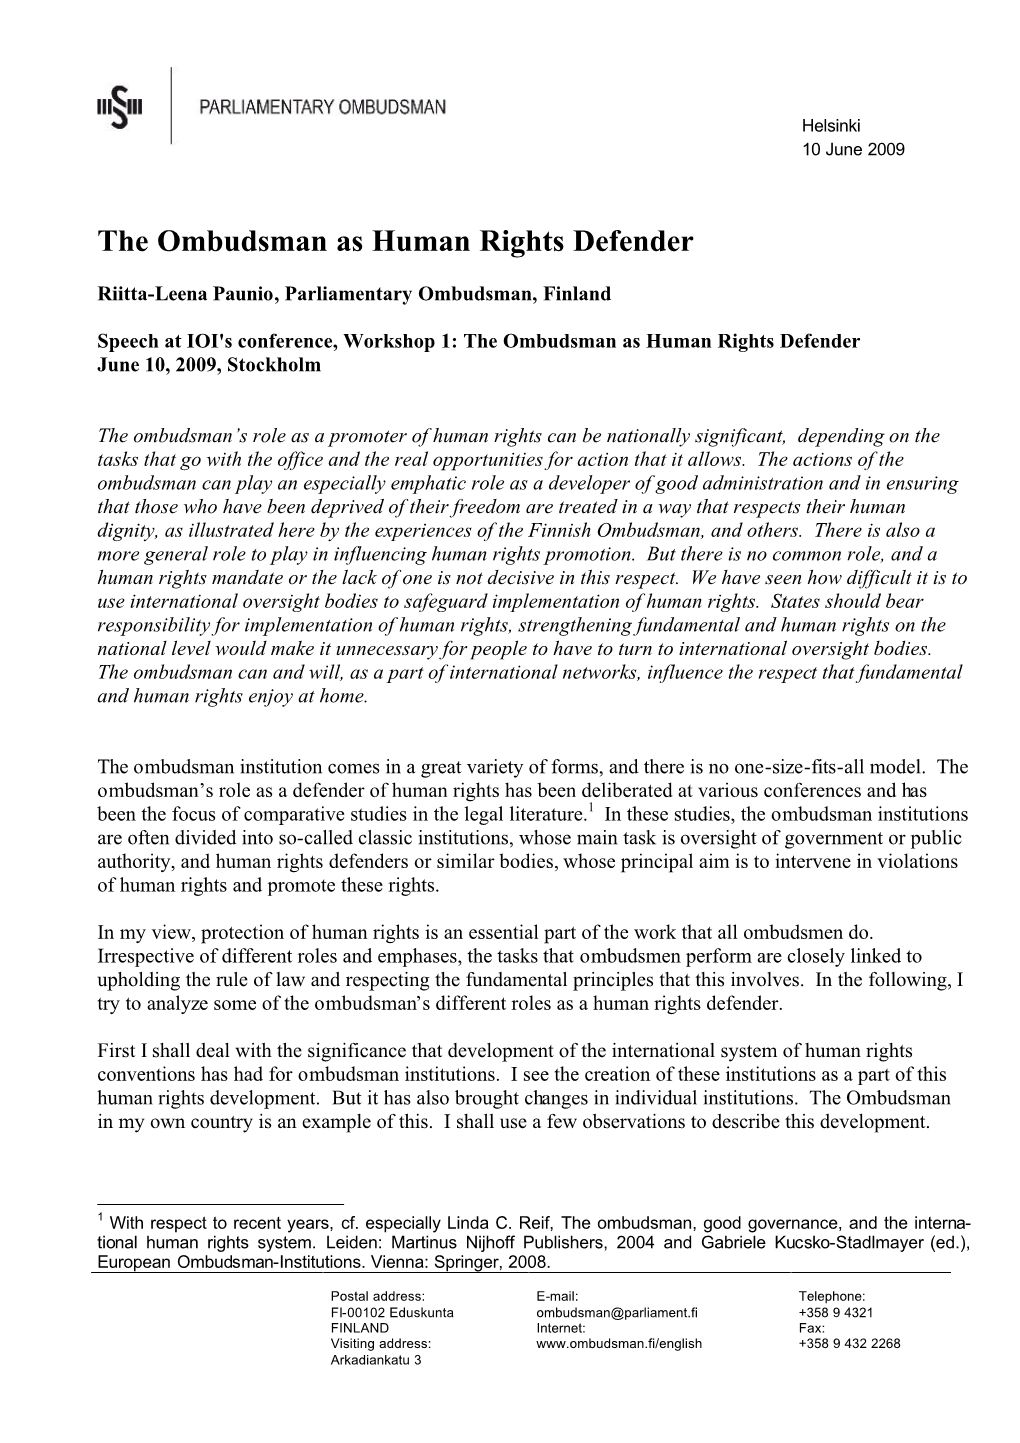 The Ombudsman As Human Rights Defender